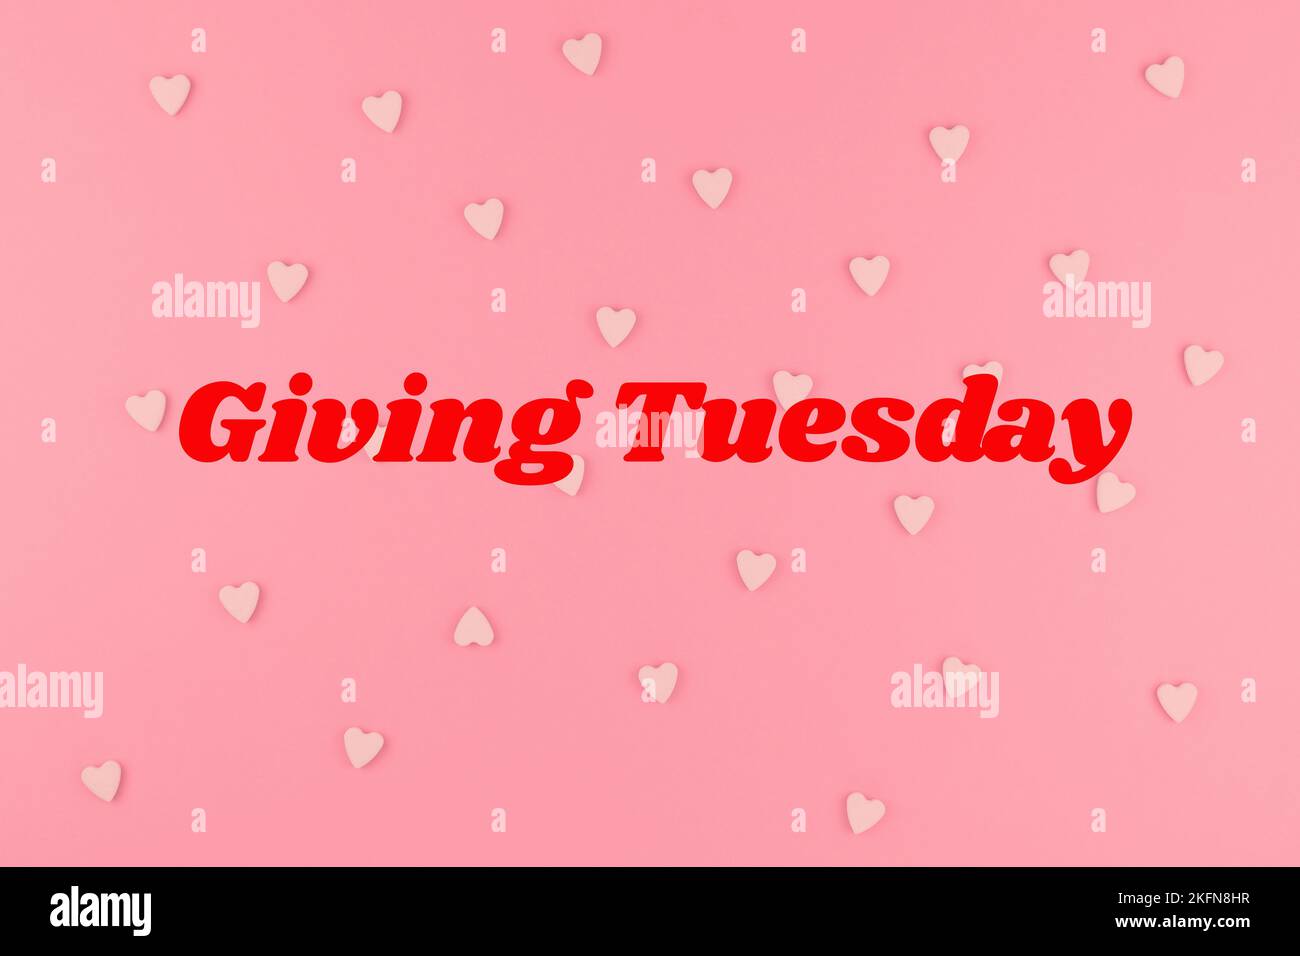 Giving Tuesday is a global day of charitable giving after Black Friday shopping day. Charity, give help, donations and support concept with text messa Stock Photo